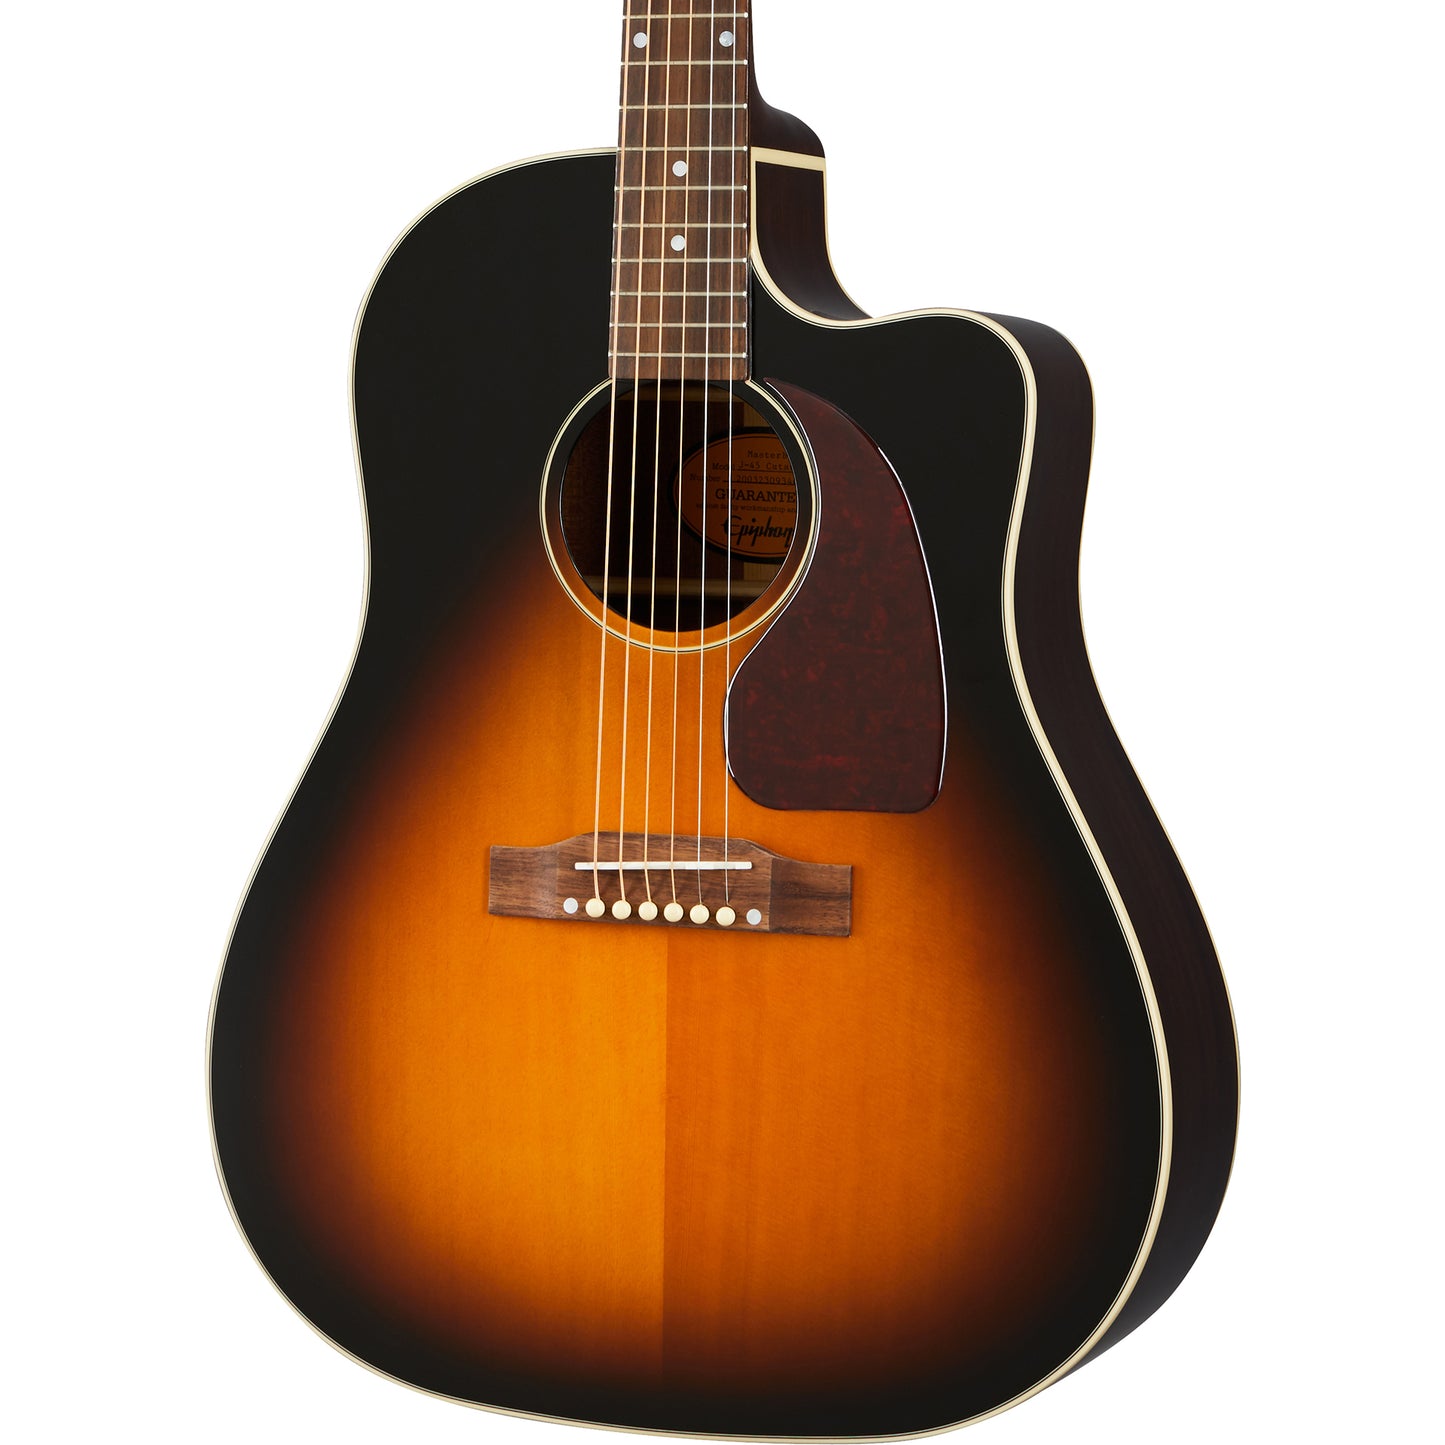 Epiphone Inspired By Gibson J-45 EC Acoustic Electric, Aged Vintage Sunburst